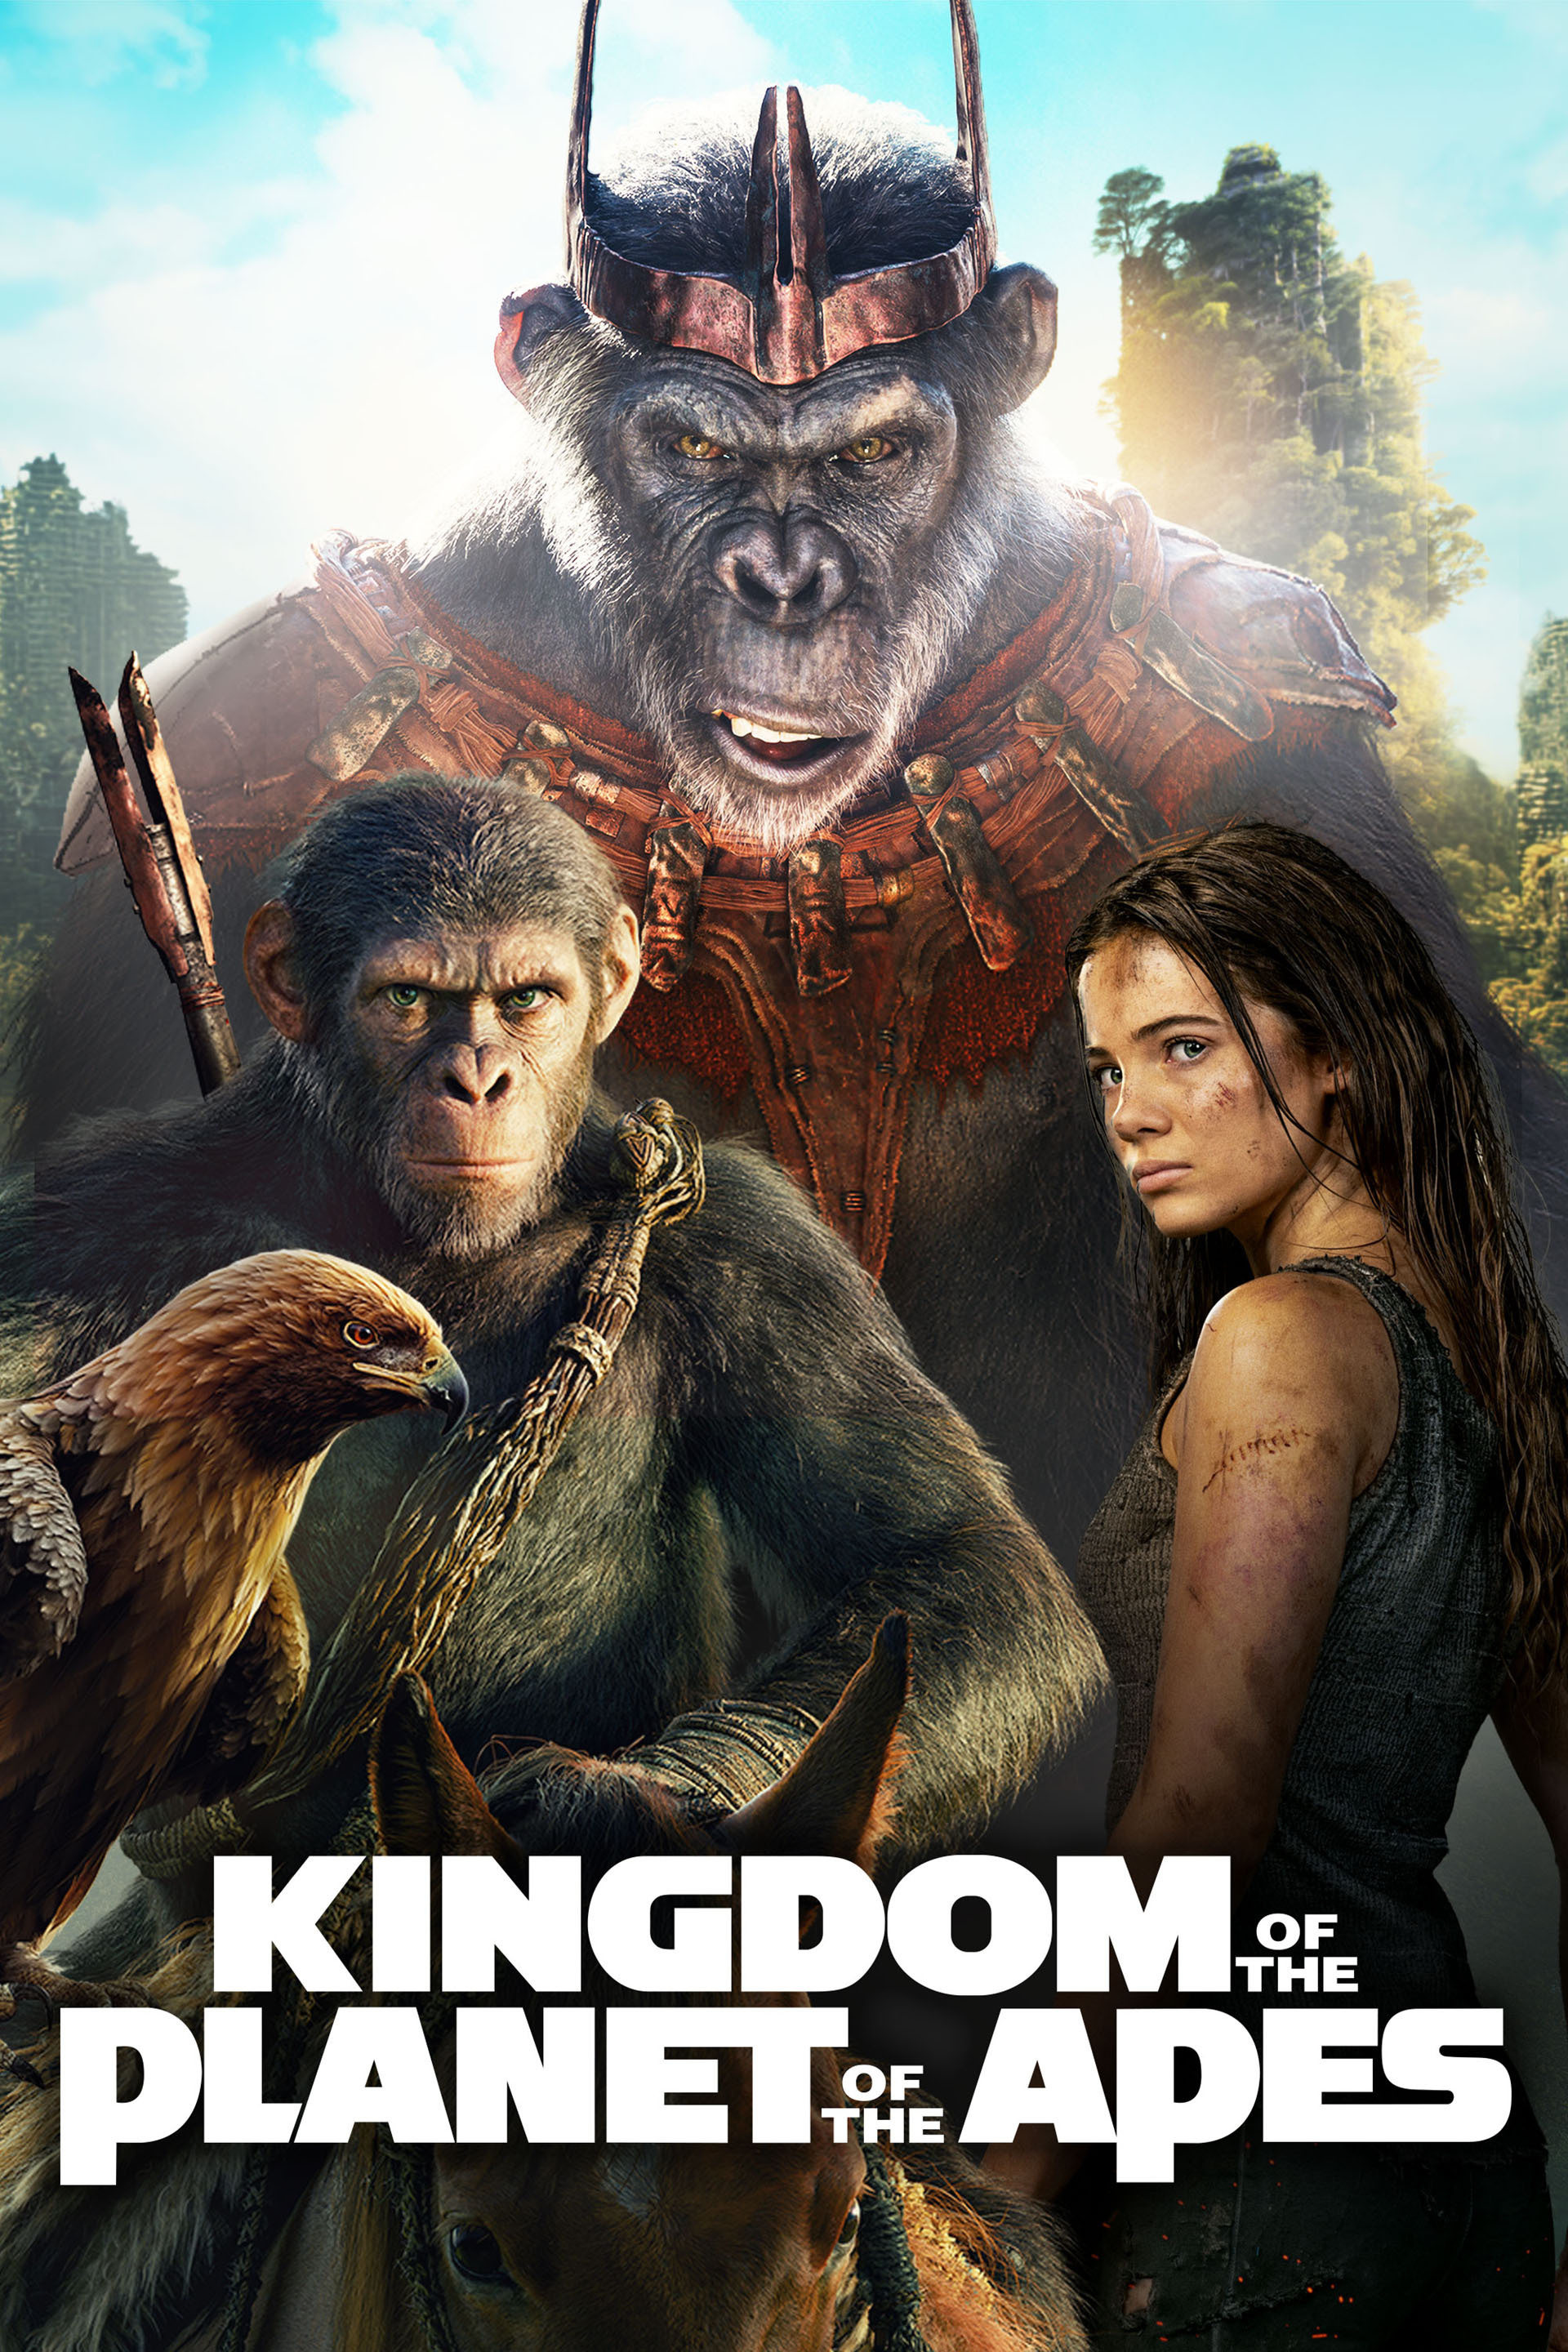 Kingdom of the Planet of the Apes: The IMAX 2D Experience